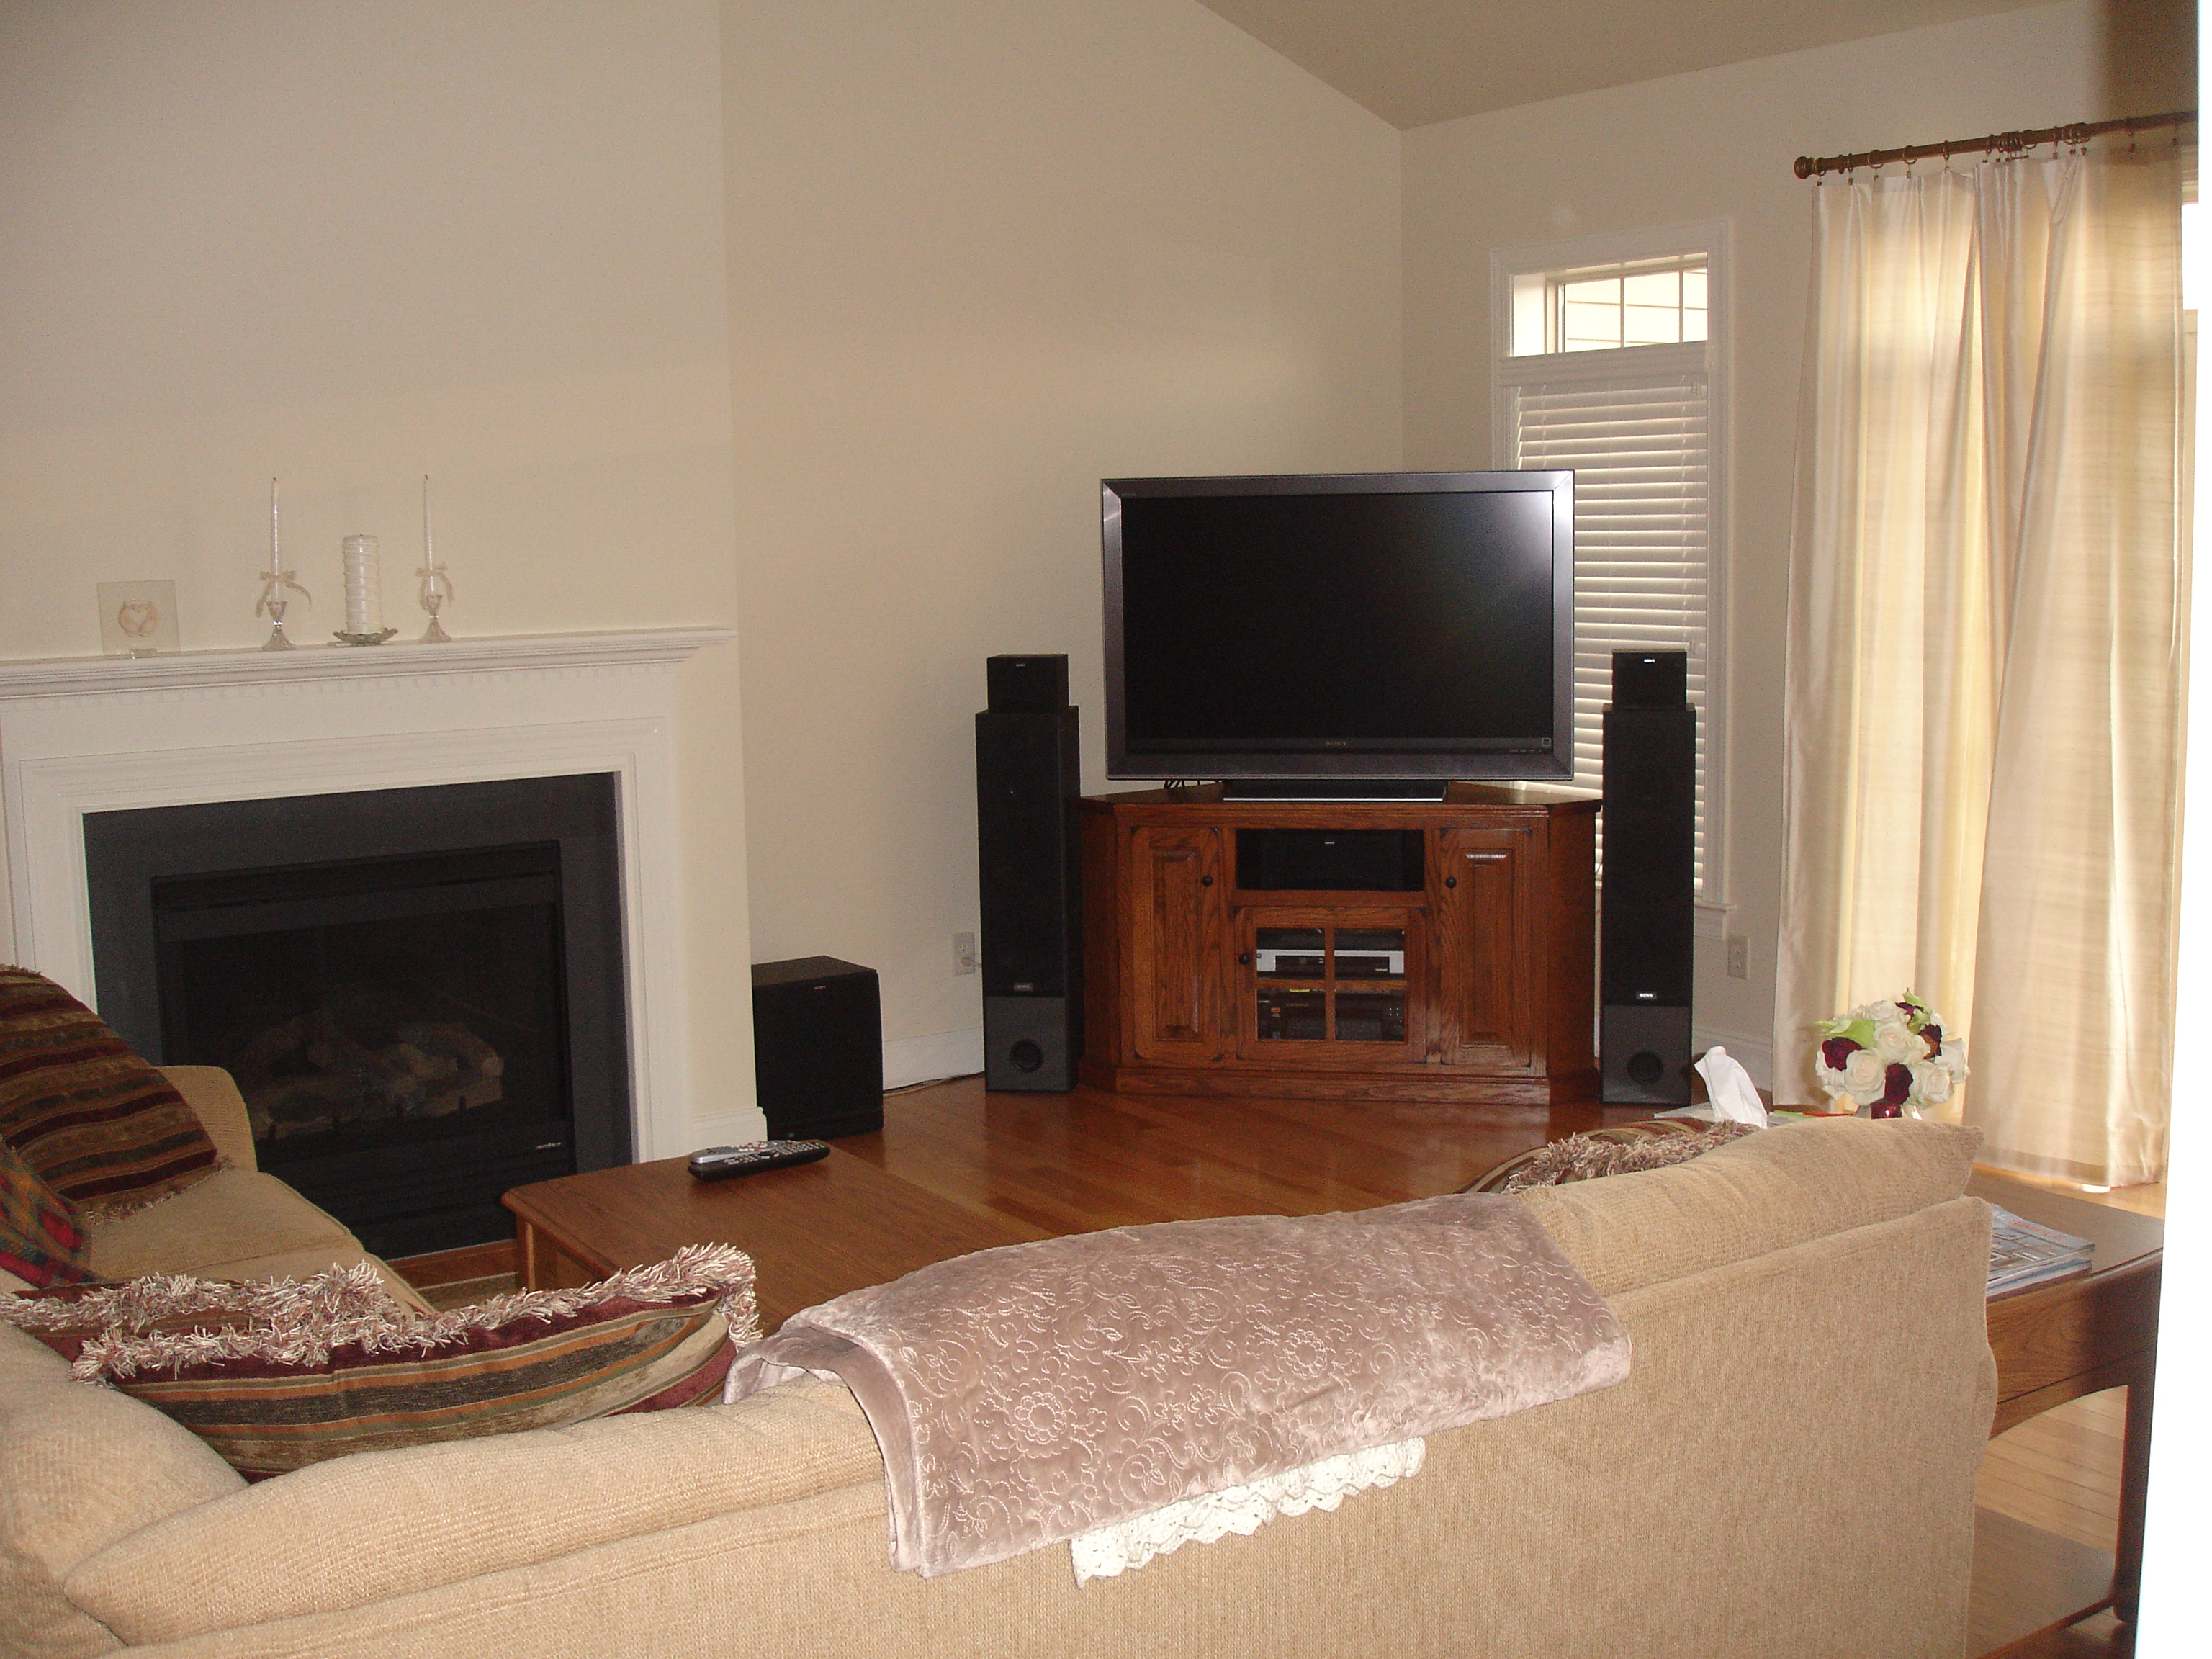 Living Room With Tv In Corner Home And Garden Tv And Tv Home Design